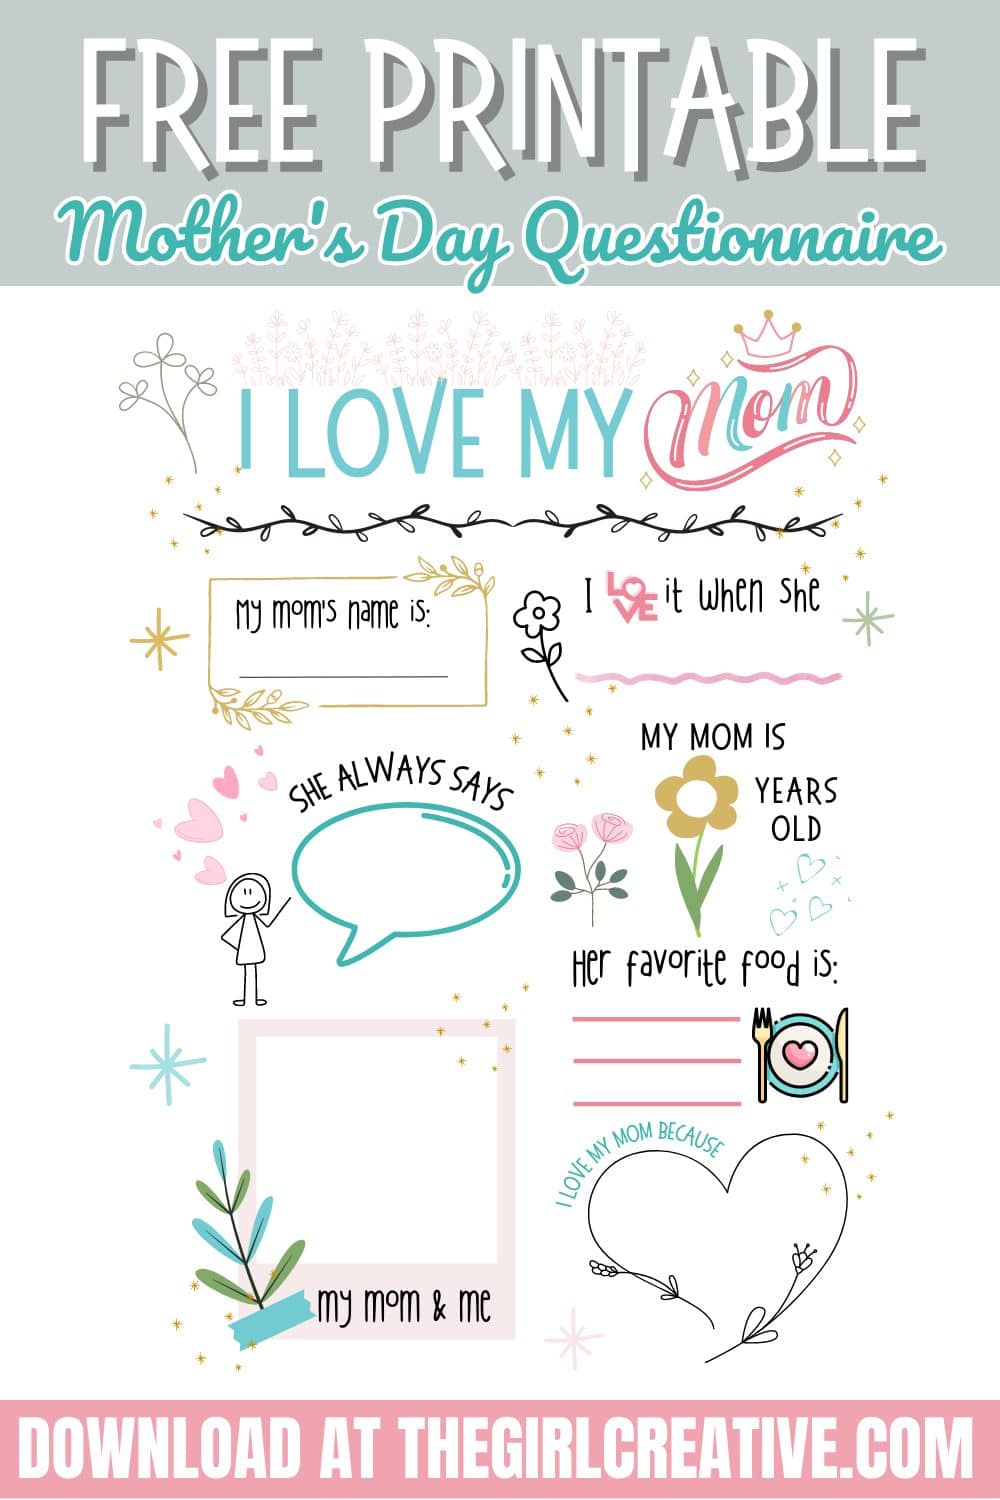 All About Mom Questionnaire for Mothers Day